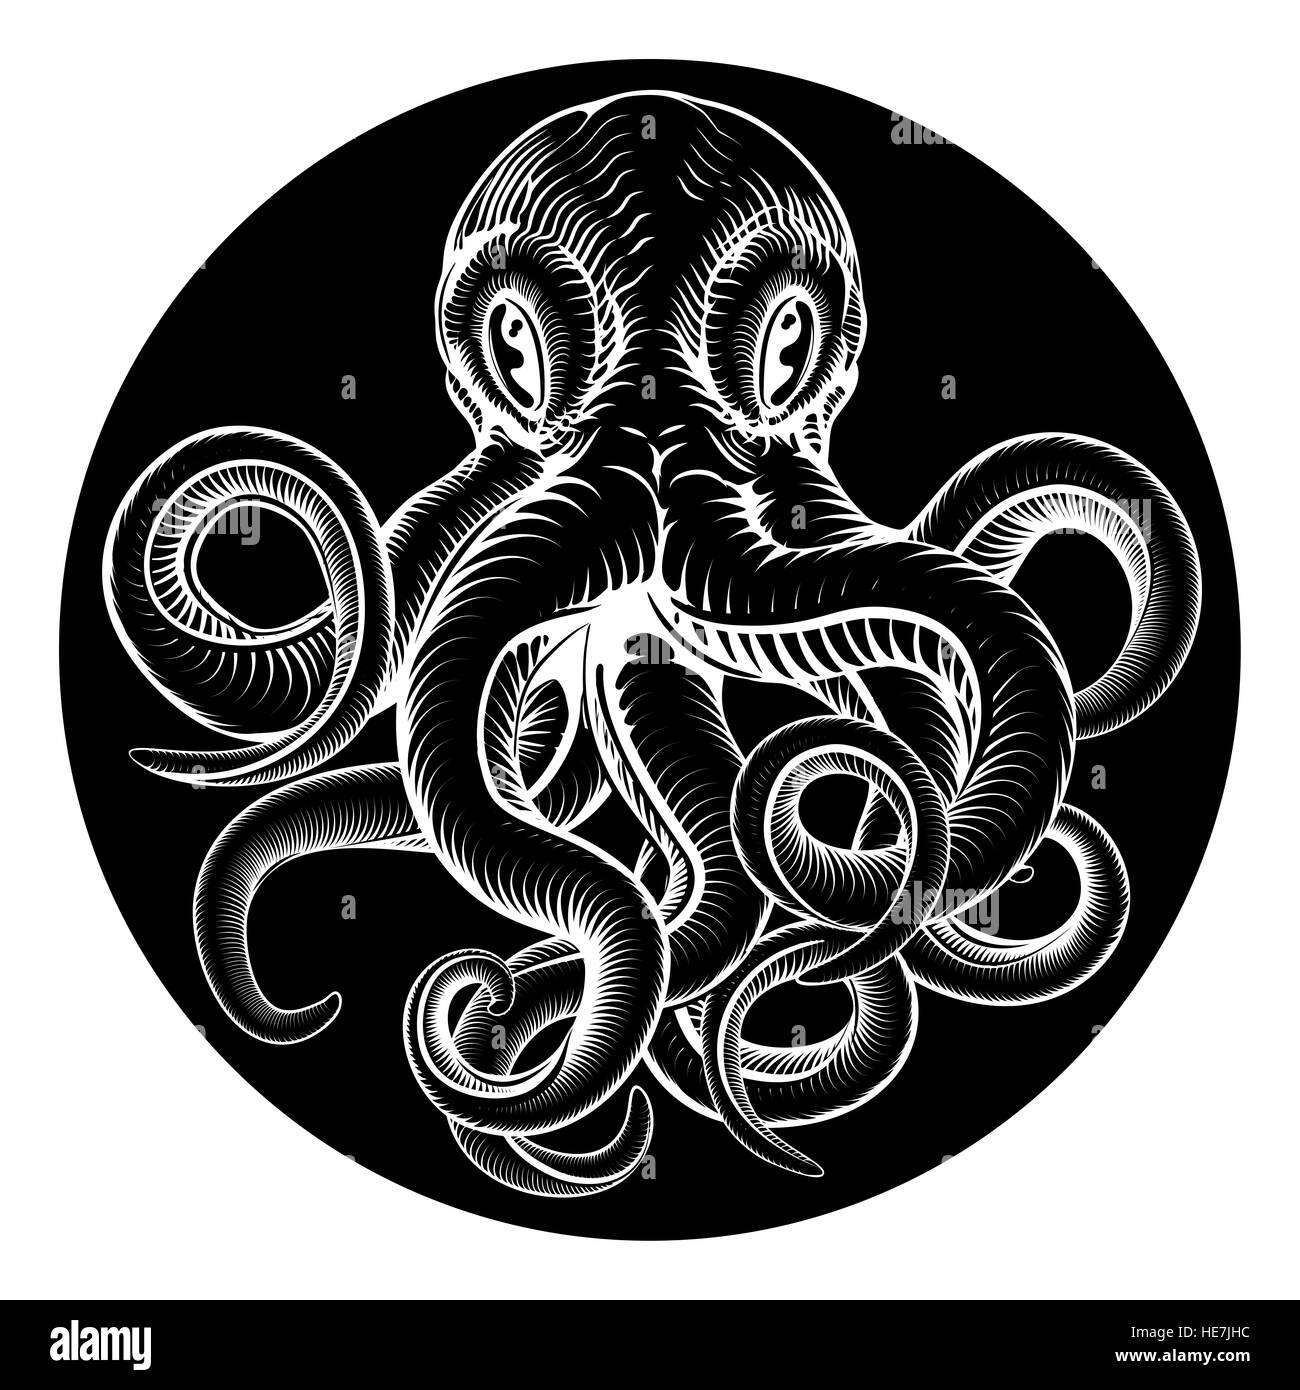 An original octopus or squid tattoo illustration concept design in a retro vintage woodcut engraved etched style Stock Photo